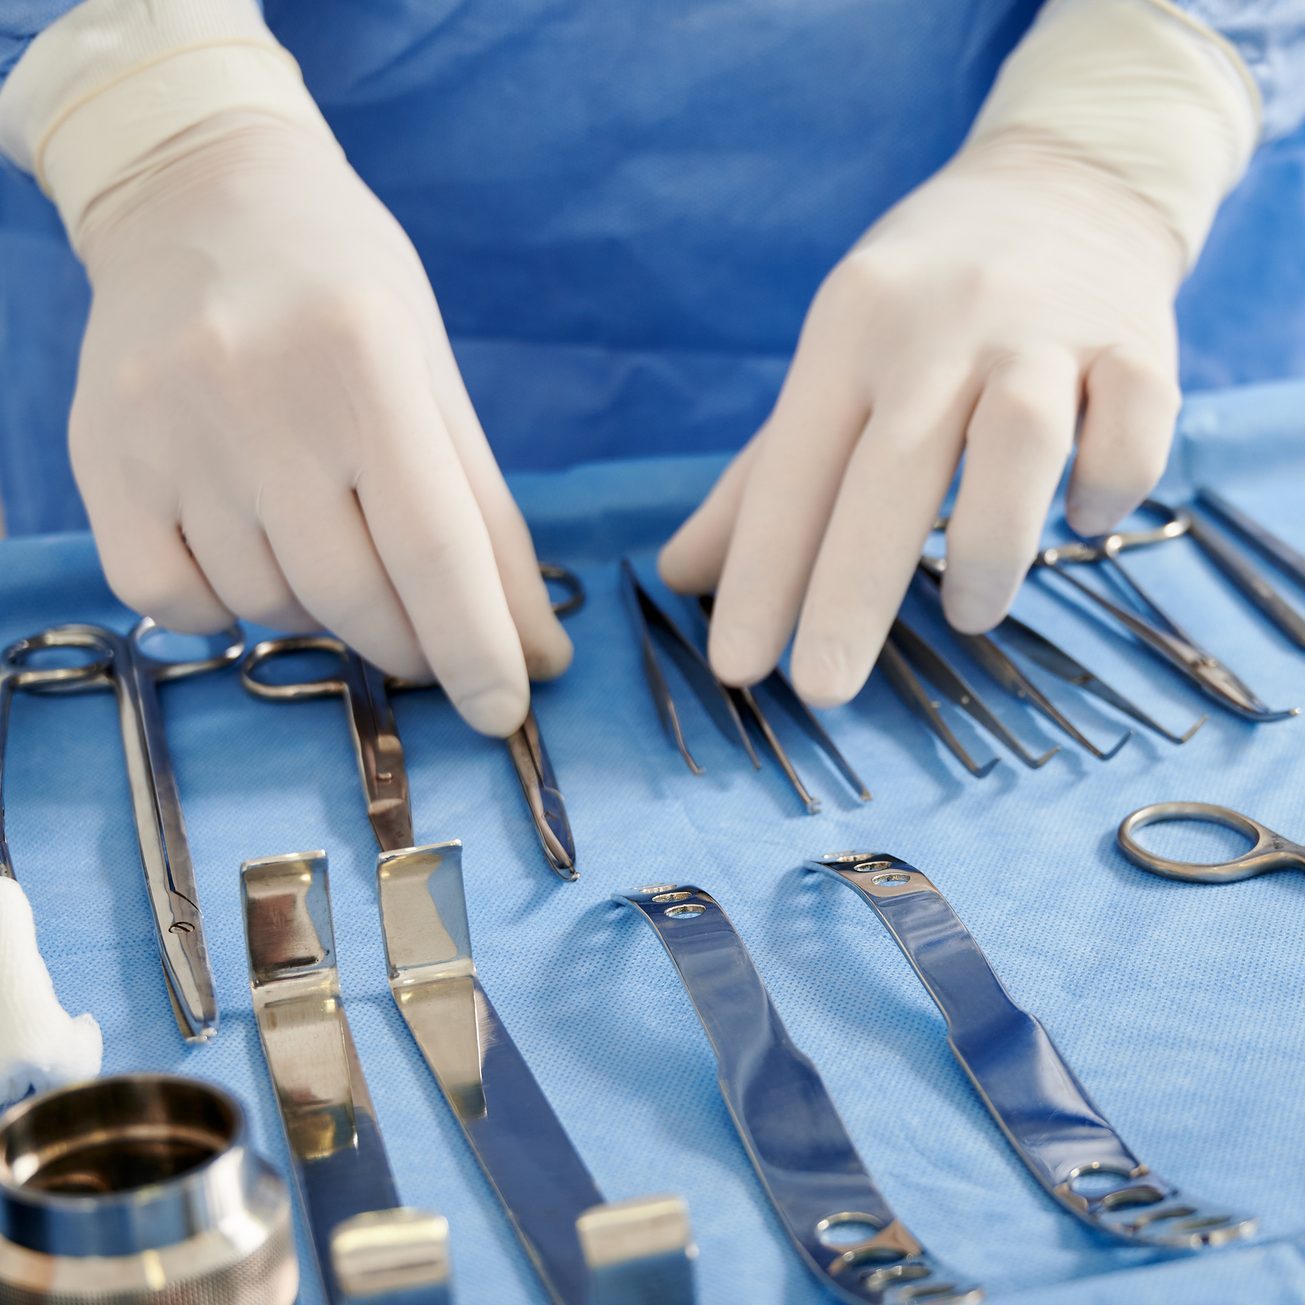 Doctor preparing instruments for plastic surgery in operating room.